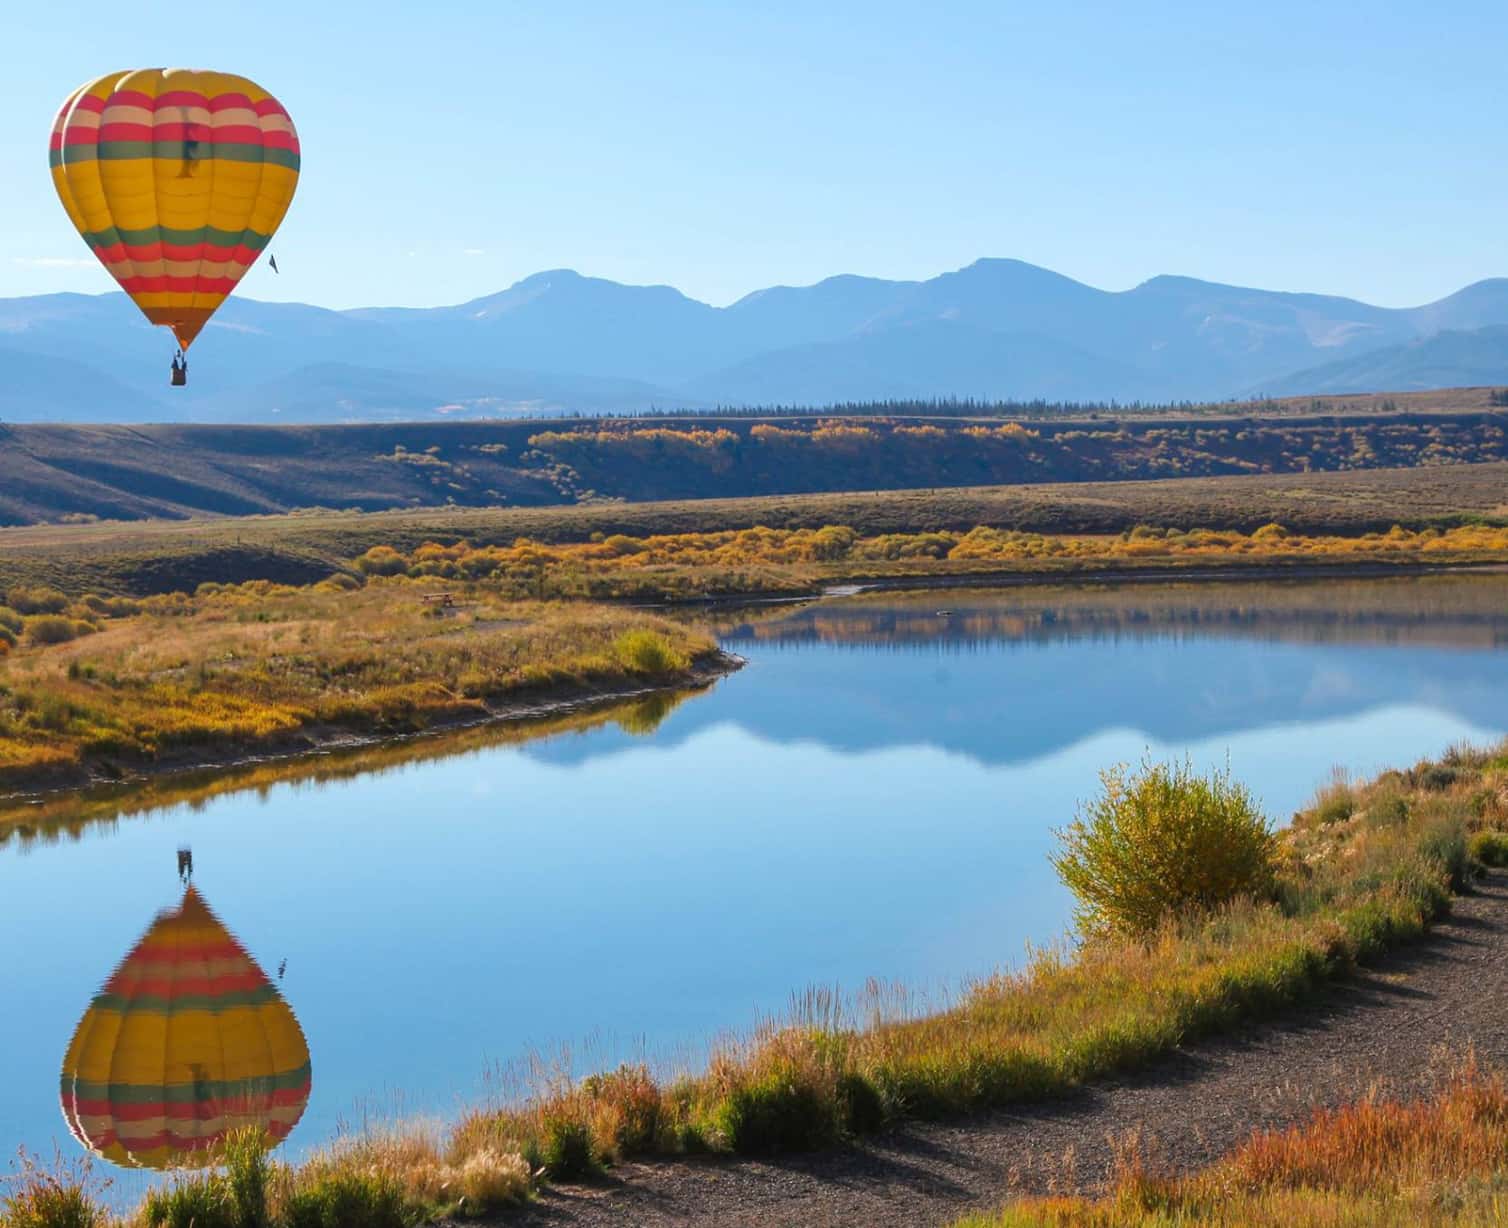 Hot air balloon floats above a small river